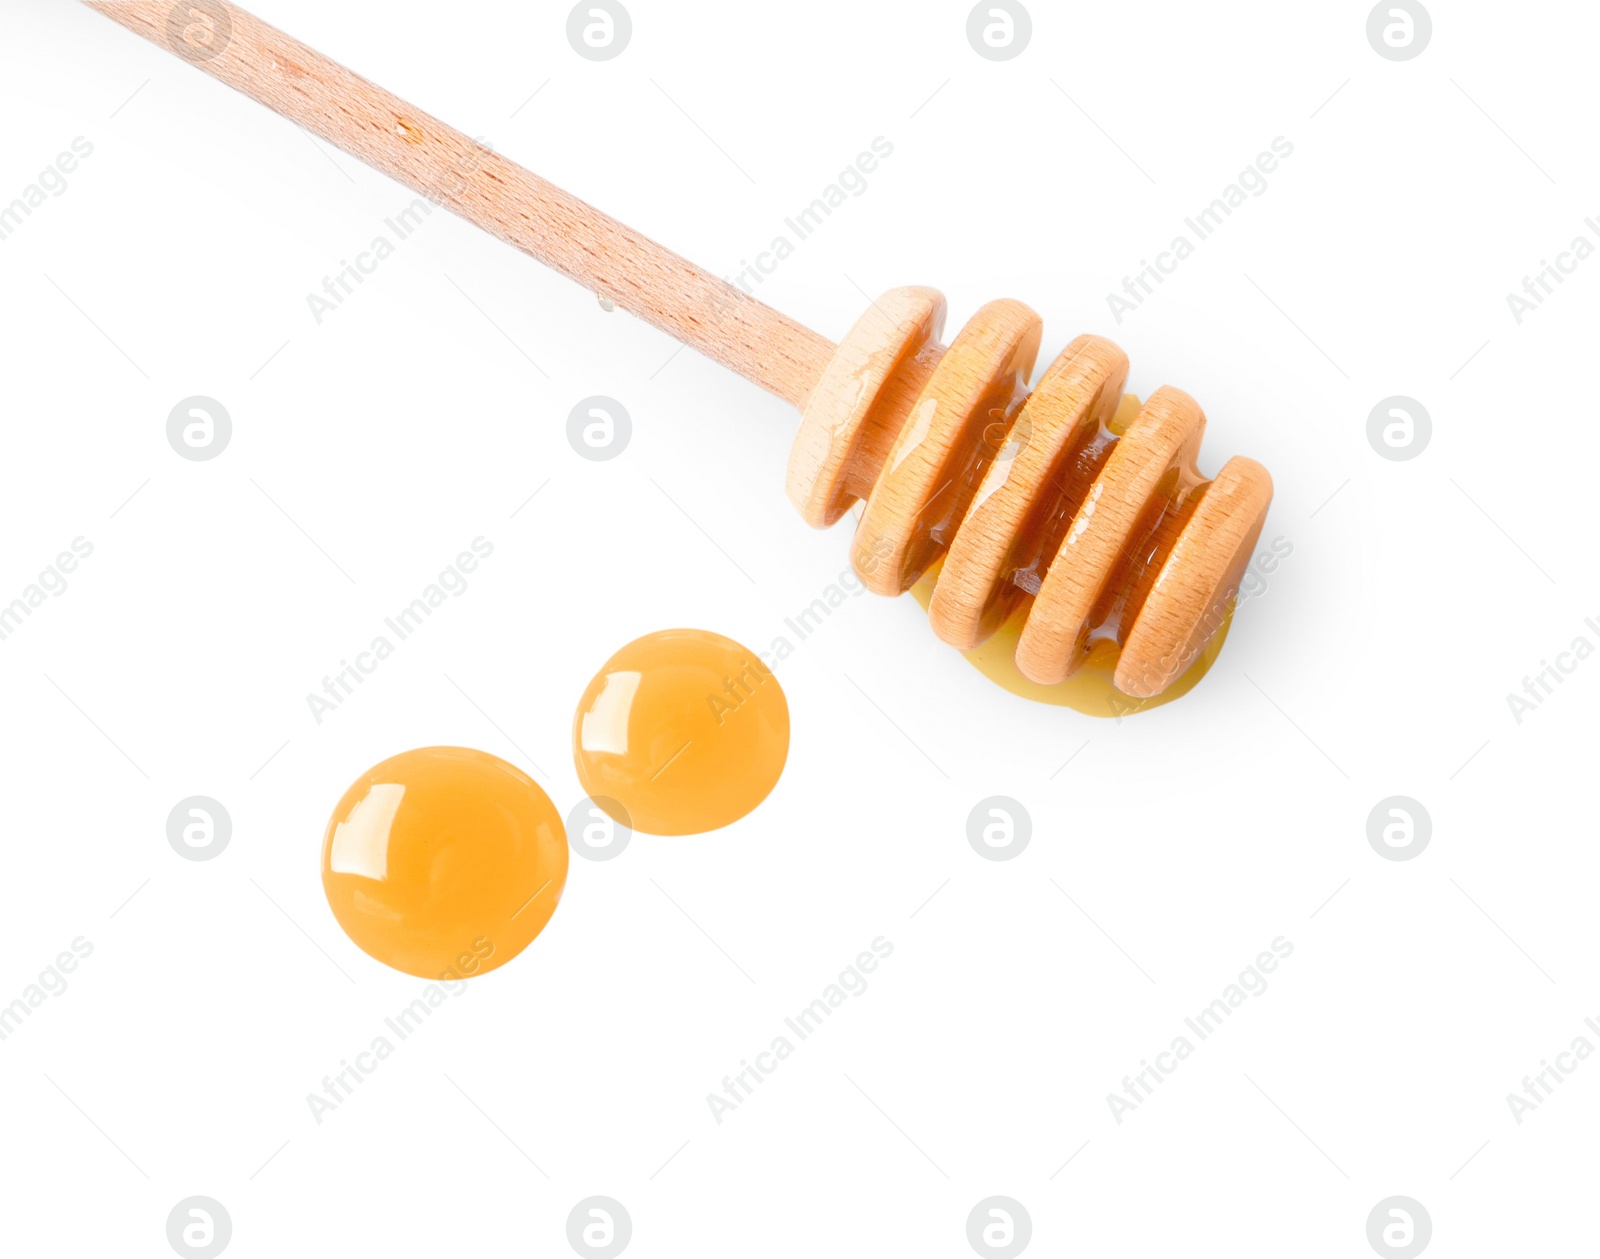 Photo of Wooden dipper and fresh honey on white background, top view